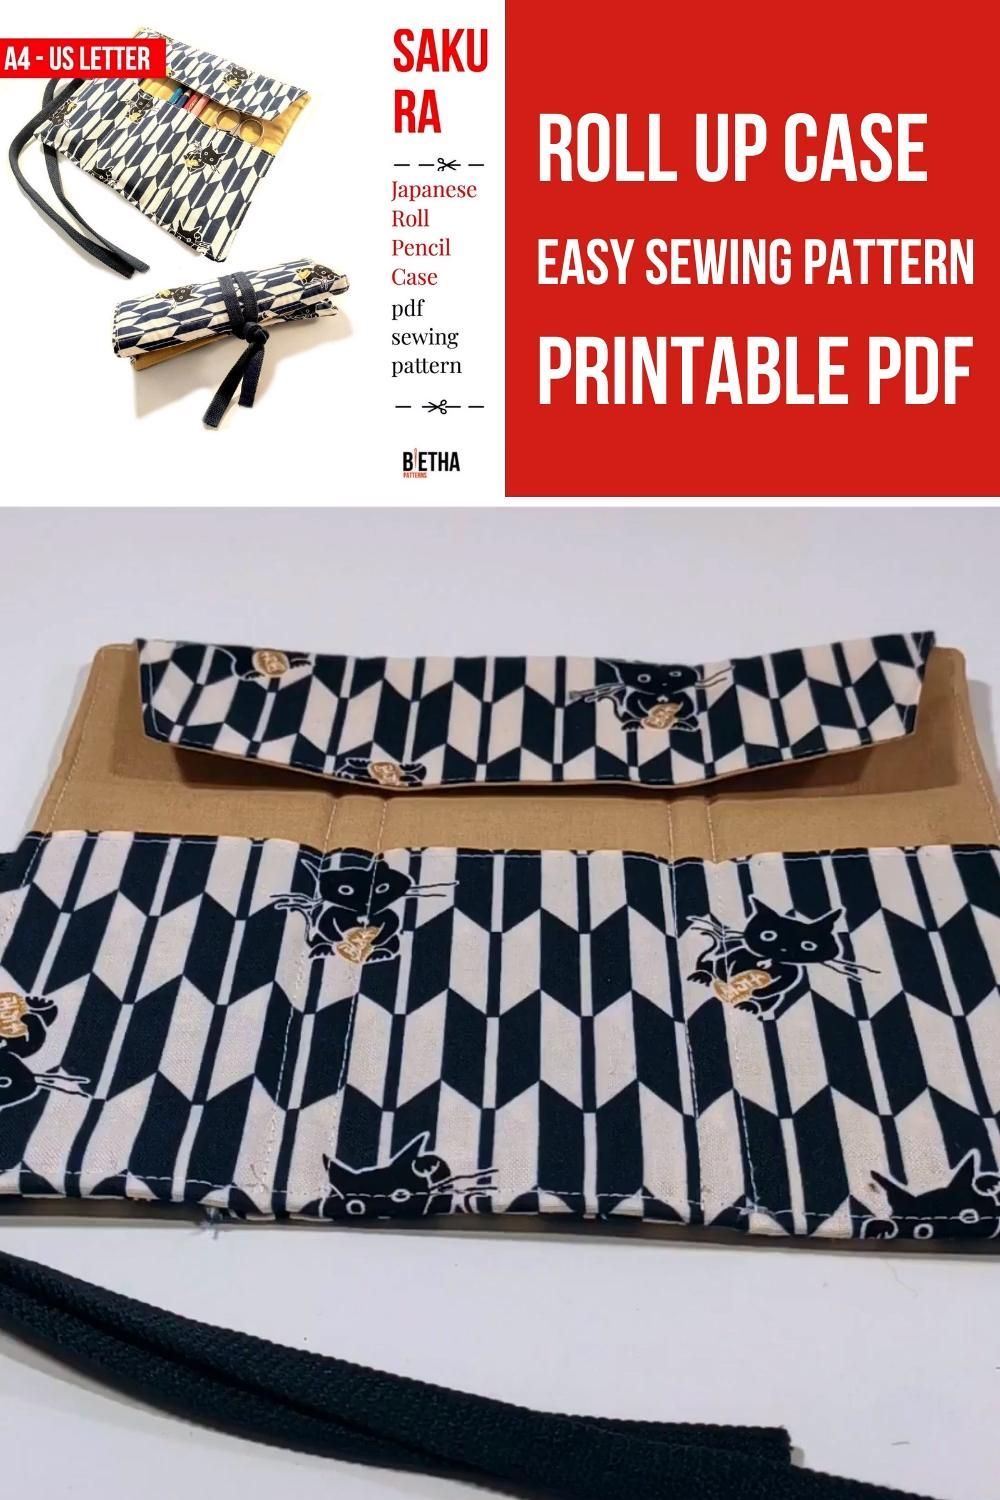 Roll Up Case Easy Sewing Pattern - Printable PDF -   19 fabric crafts projects easy diy ideas